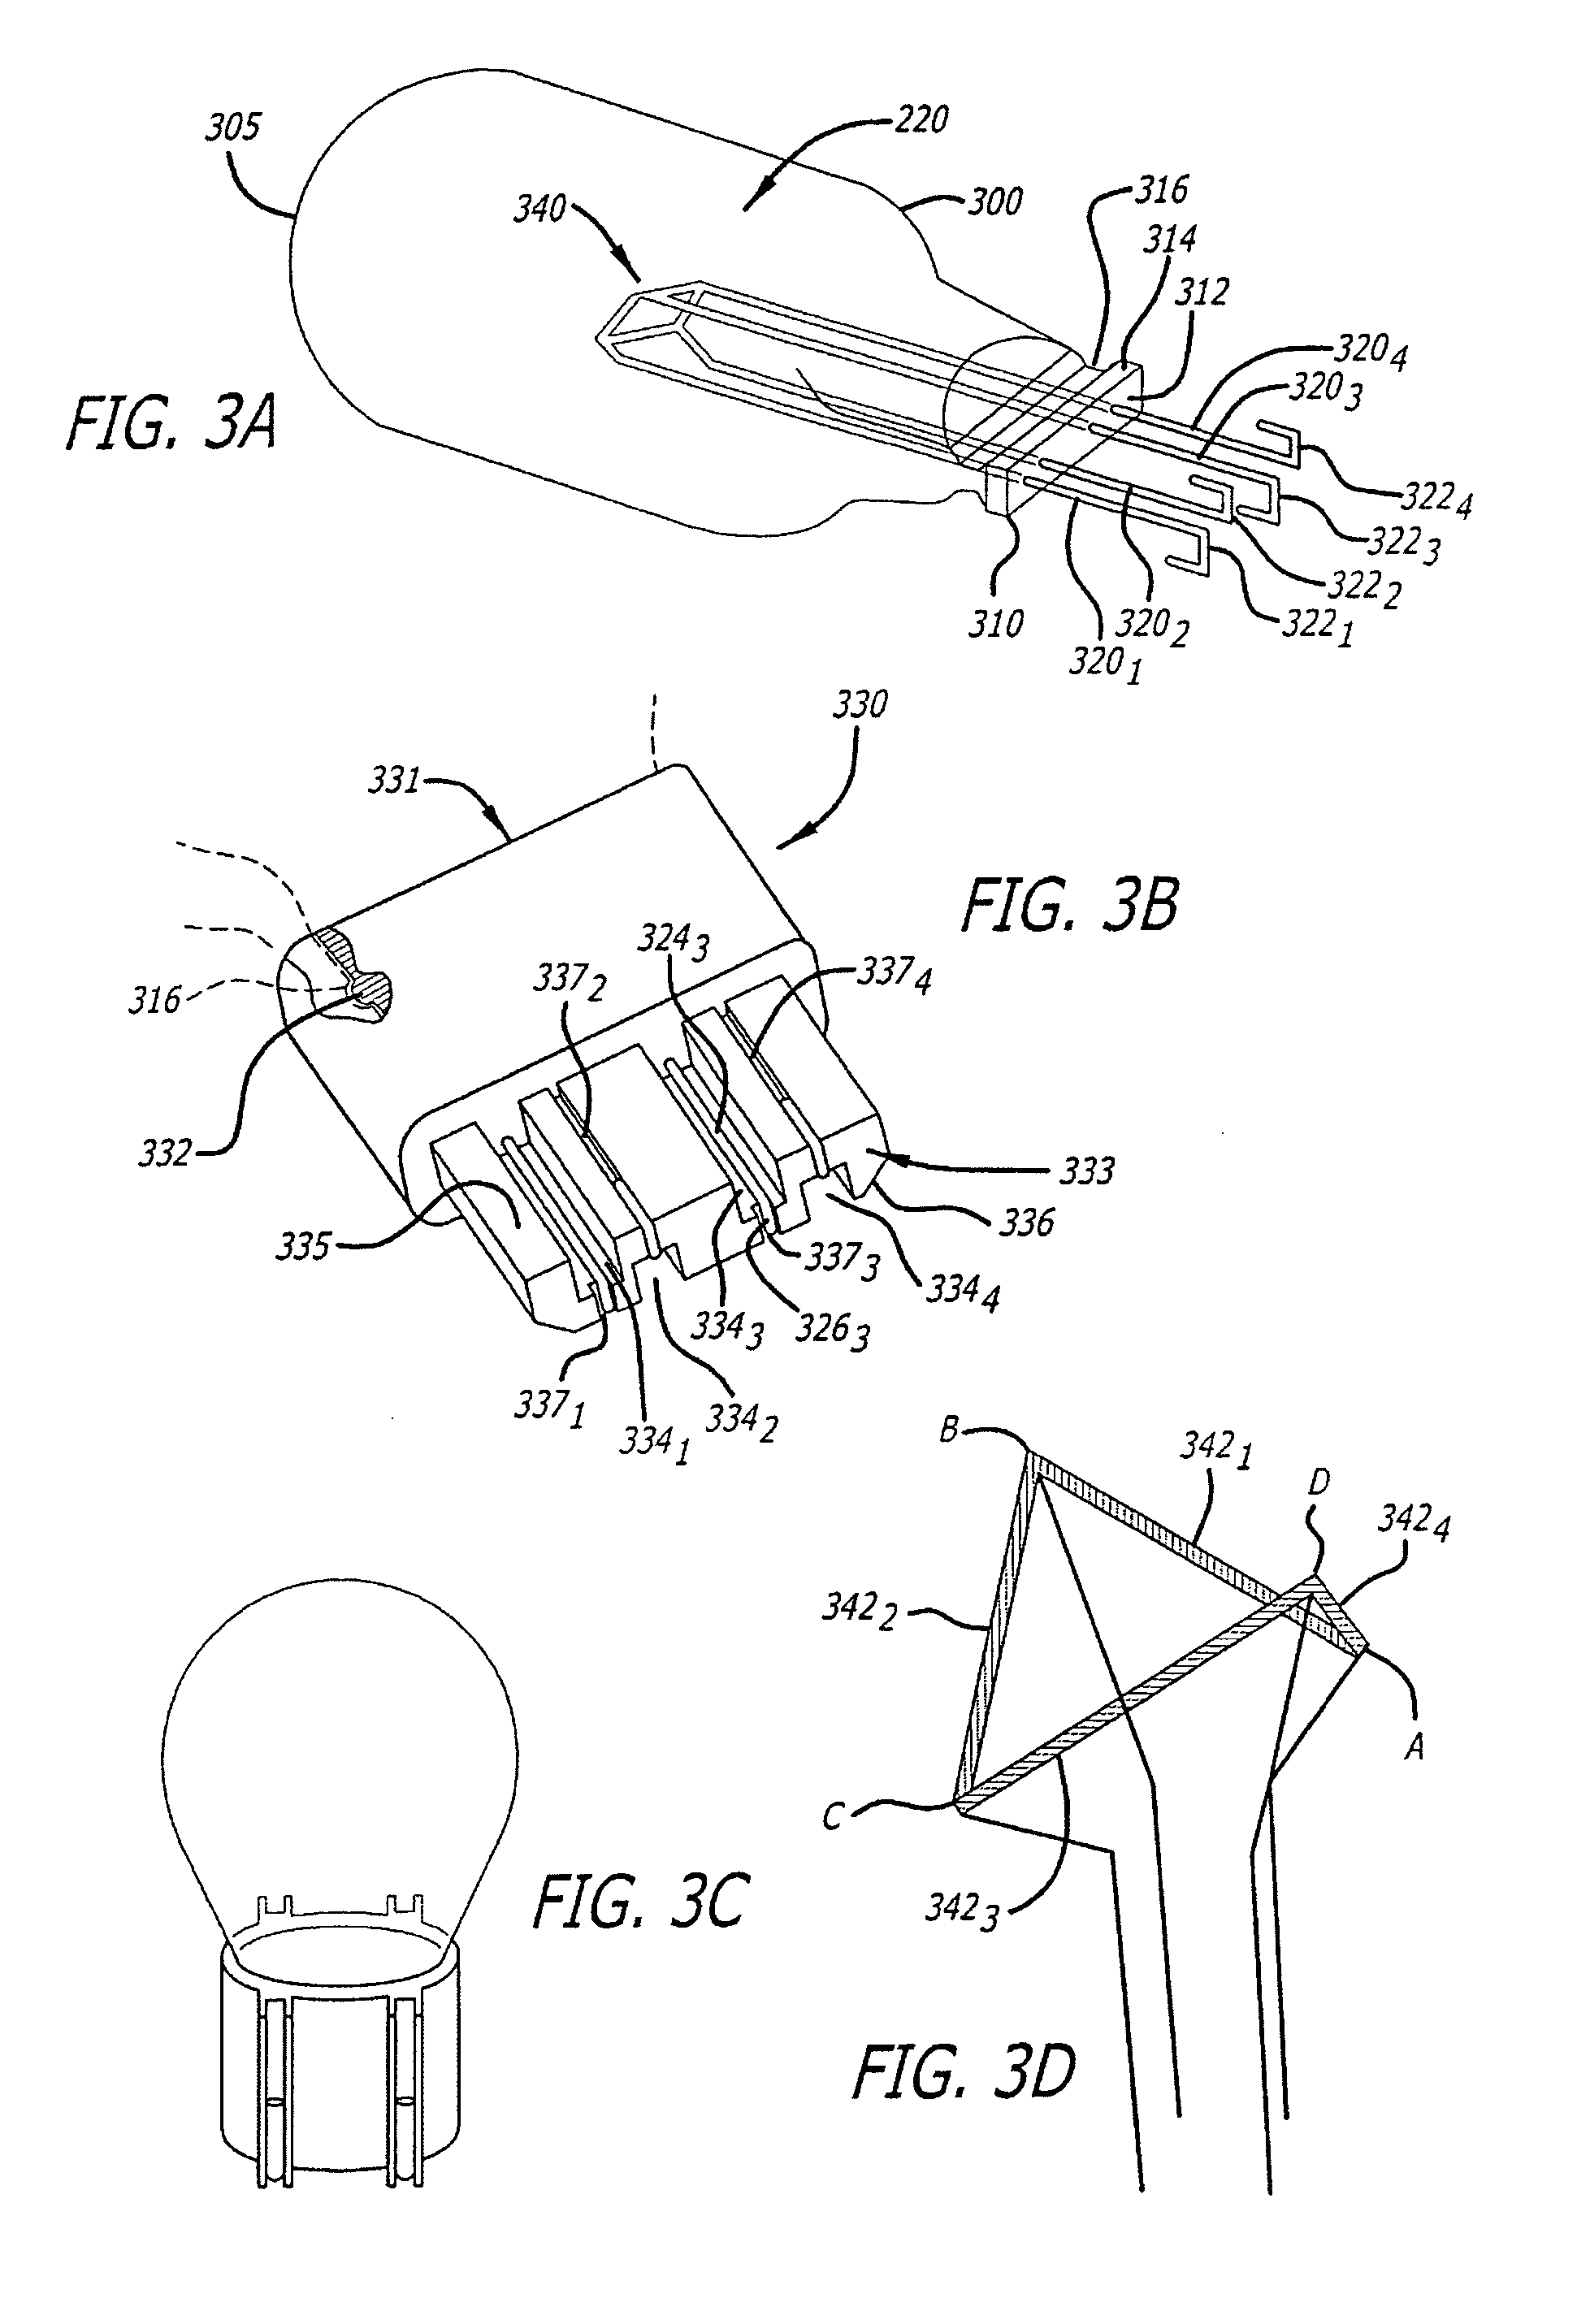 Apparatus, logic and method for emulating the lighting effect of a candle